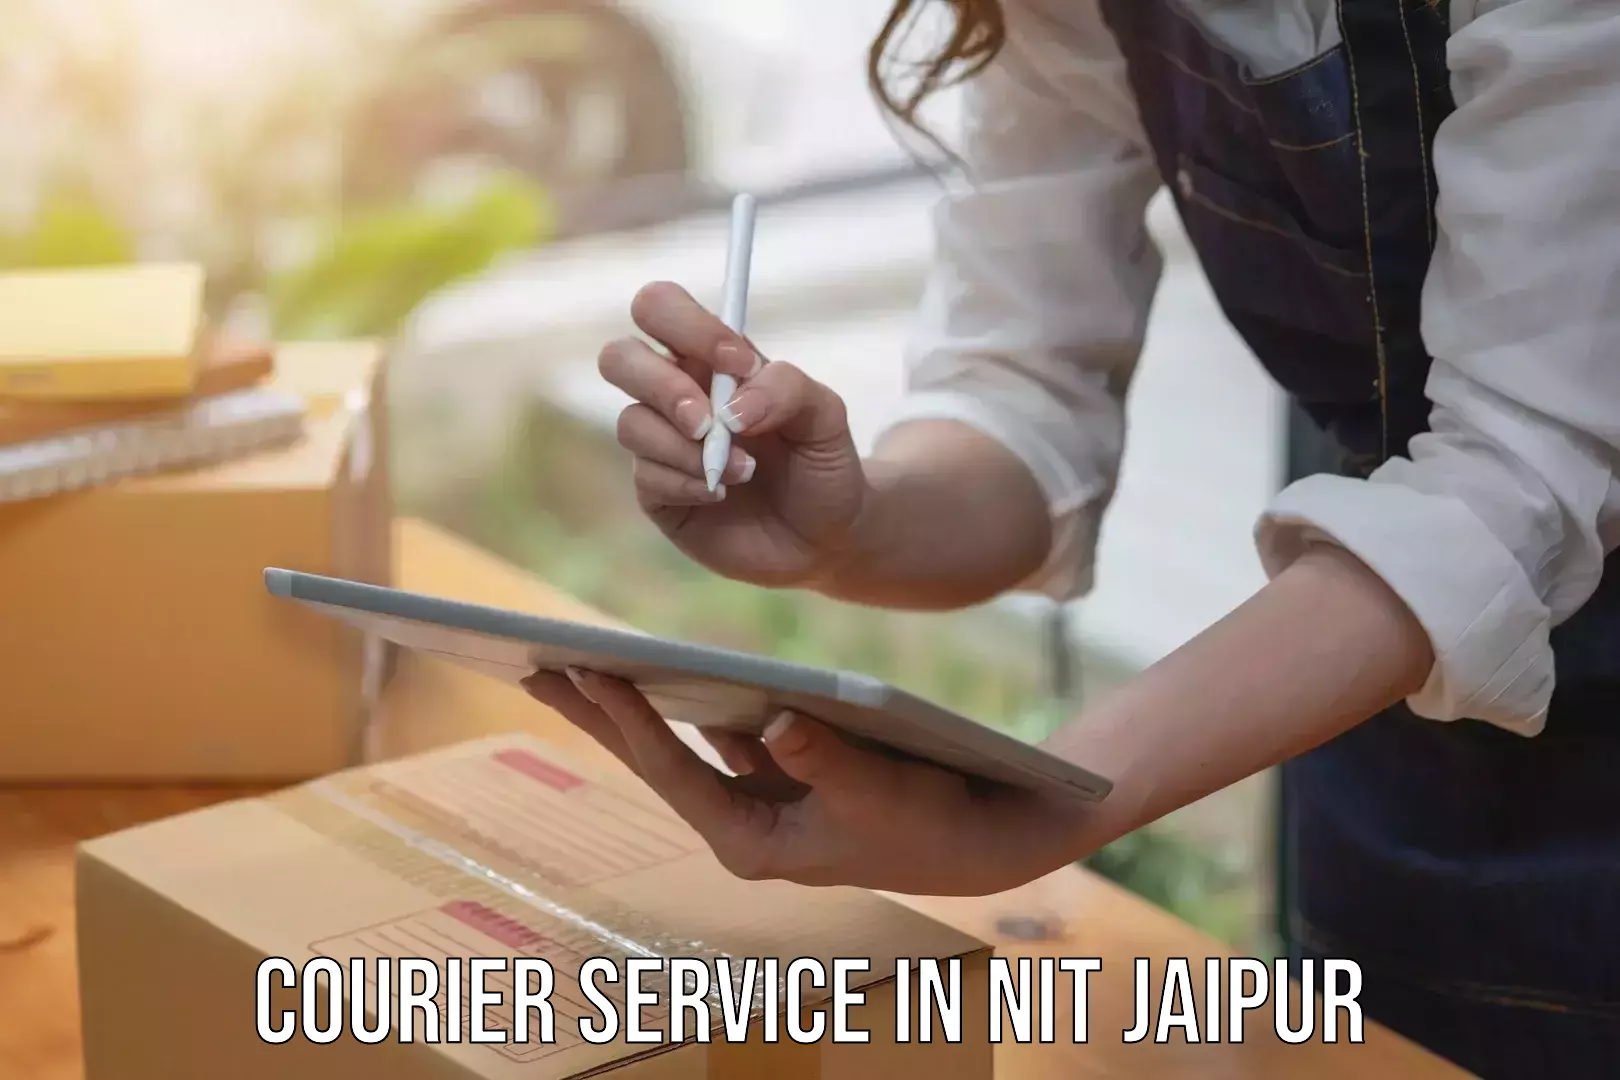 Courier service partnerships in NIT Jaipur